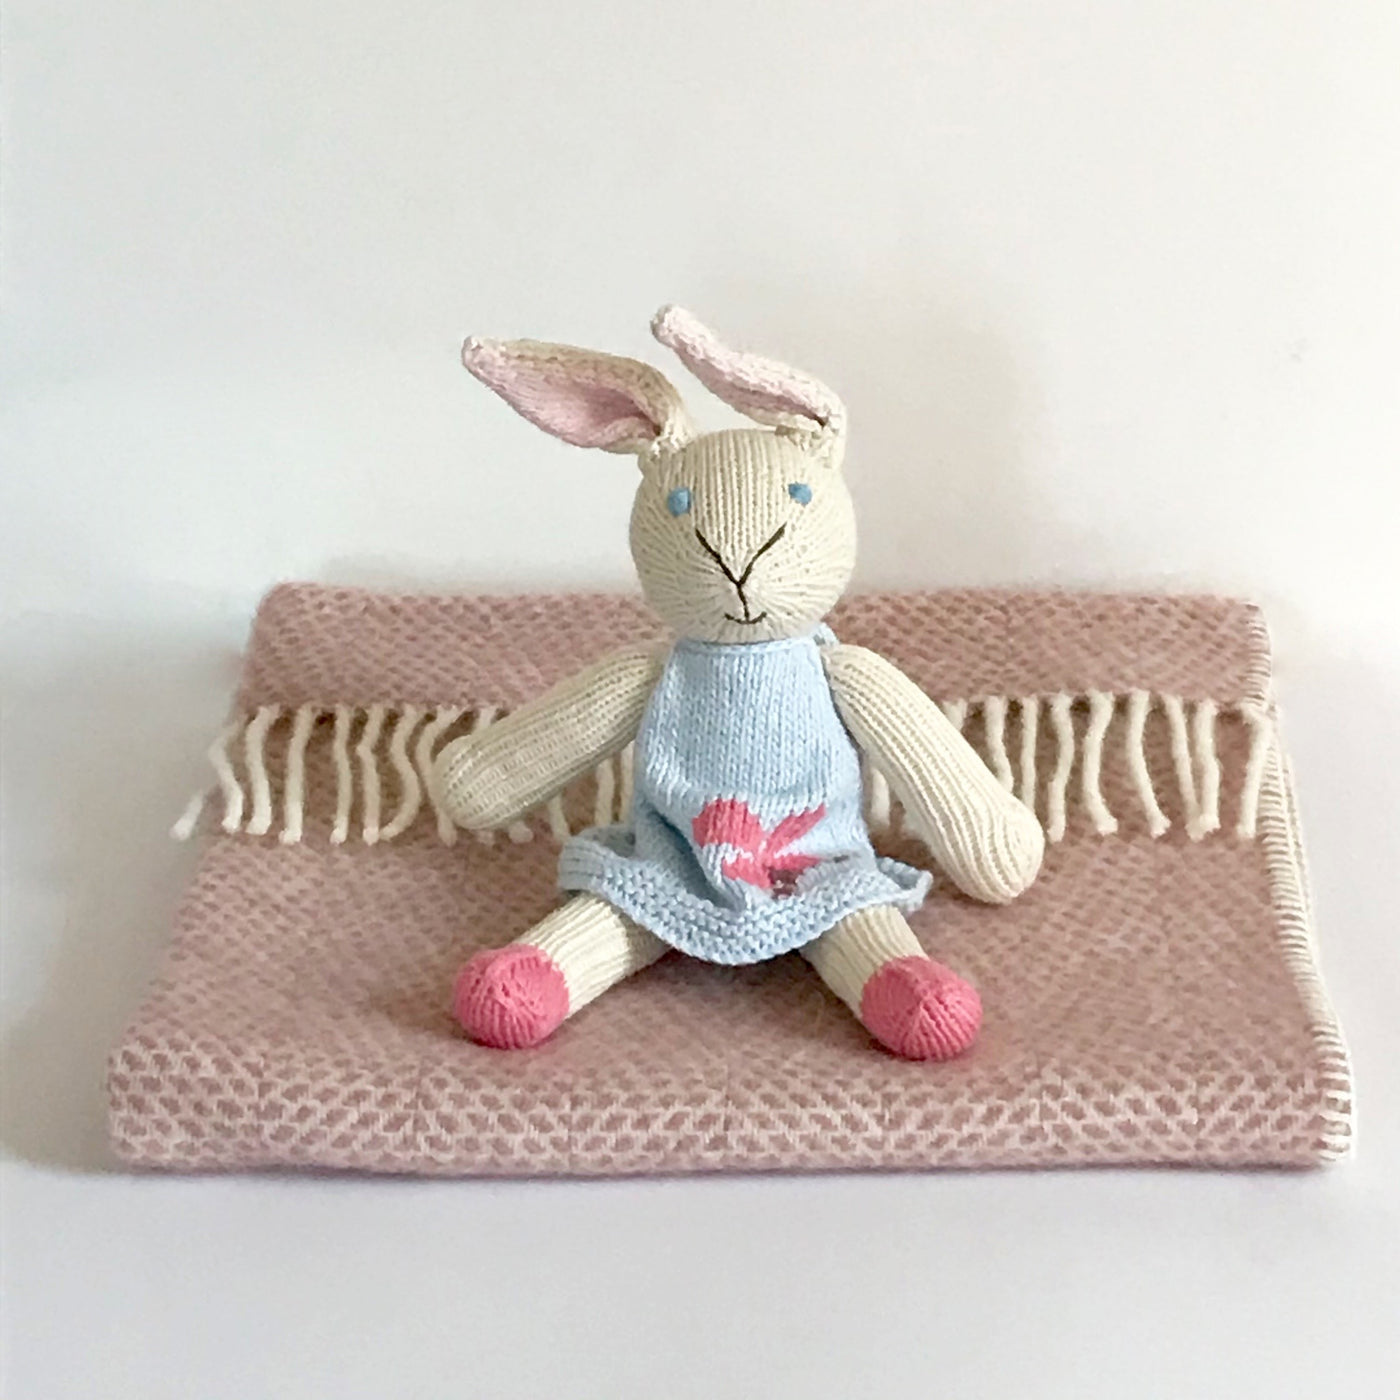 Rory & Ruby pure new wool baby blanket in dusky pink with organic cotton hand knitted rabbit soft toy with a blue dress.